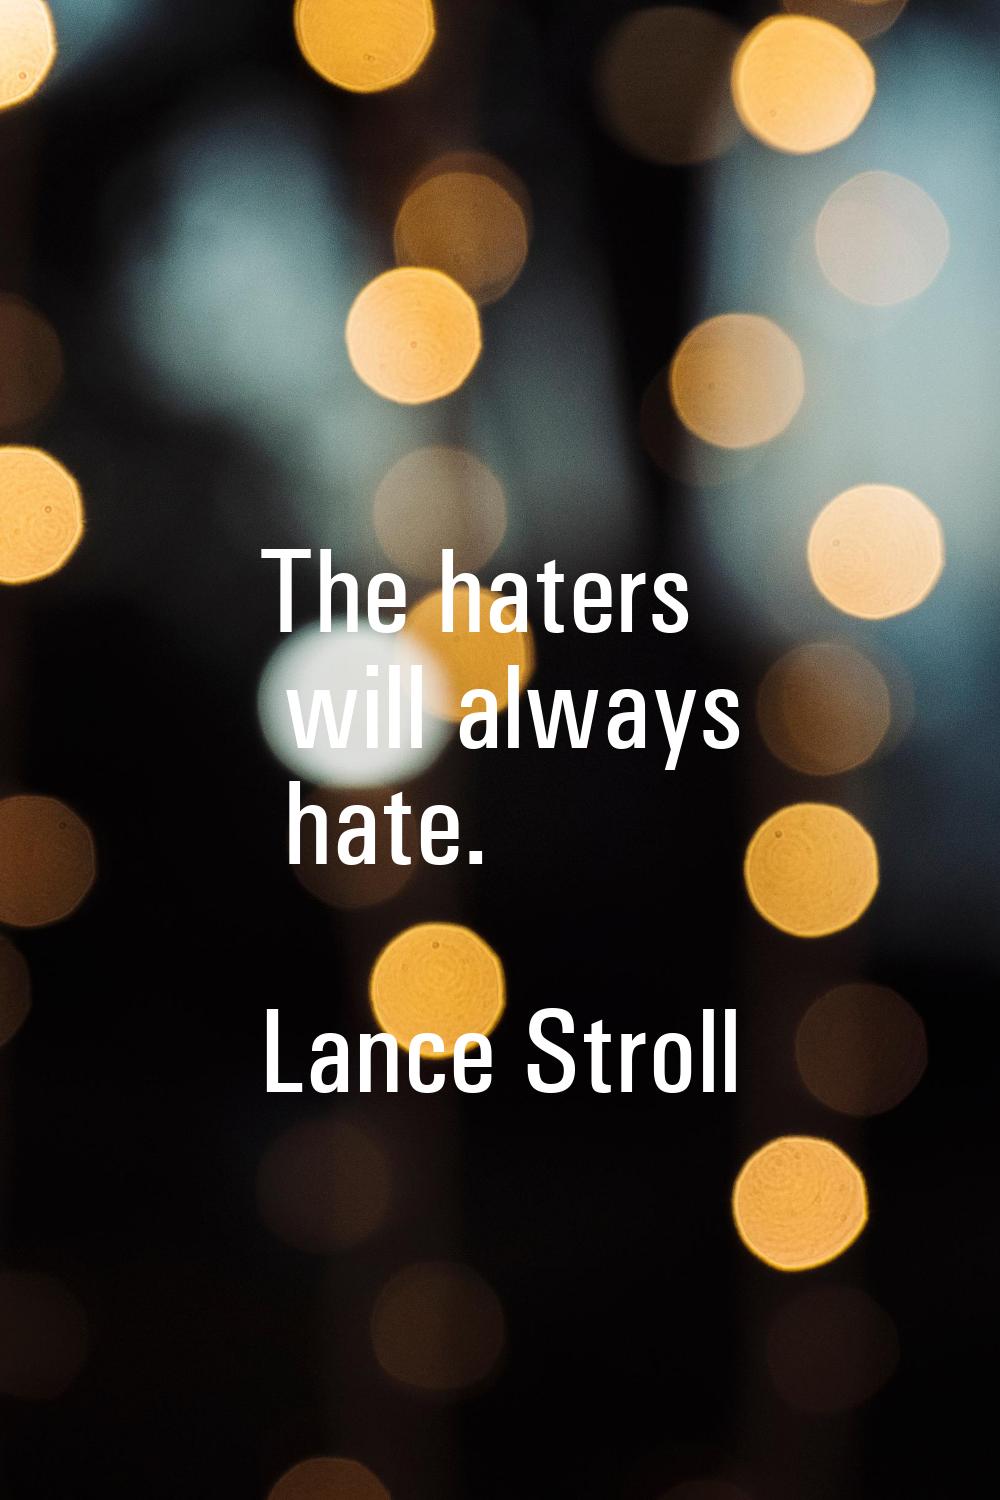 The haters will always hate.